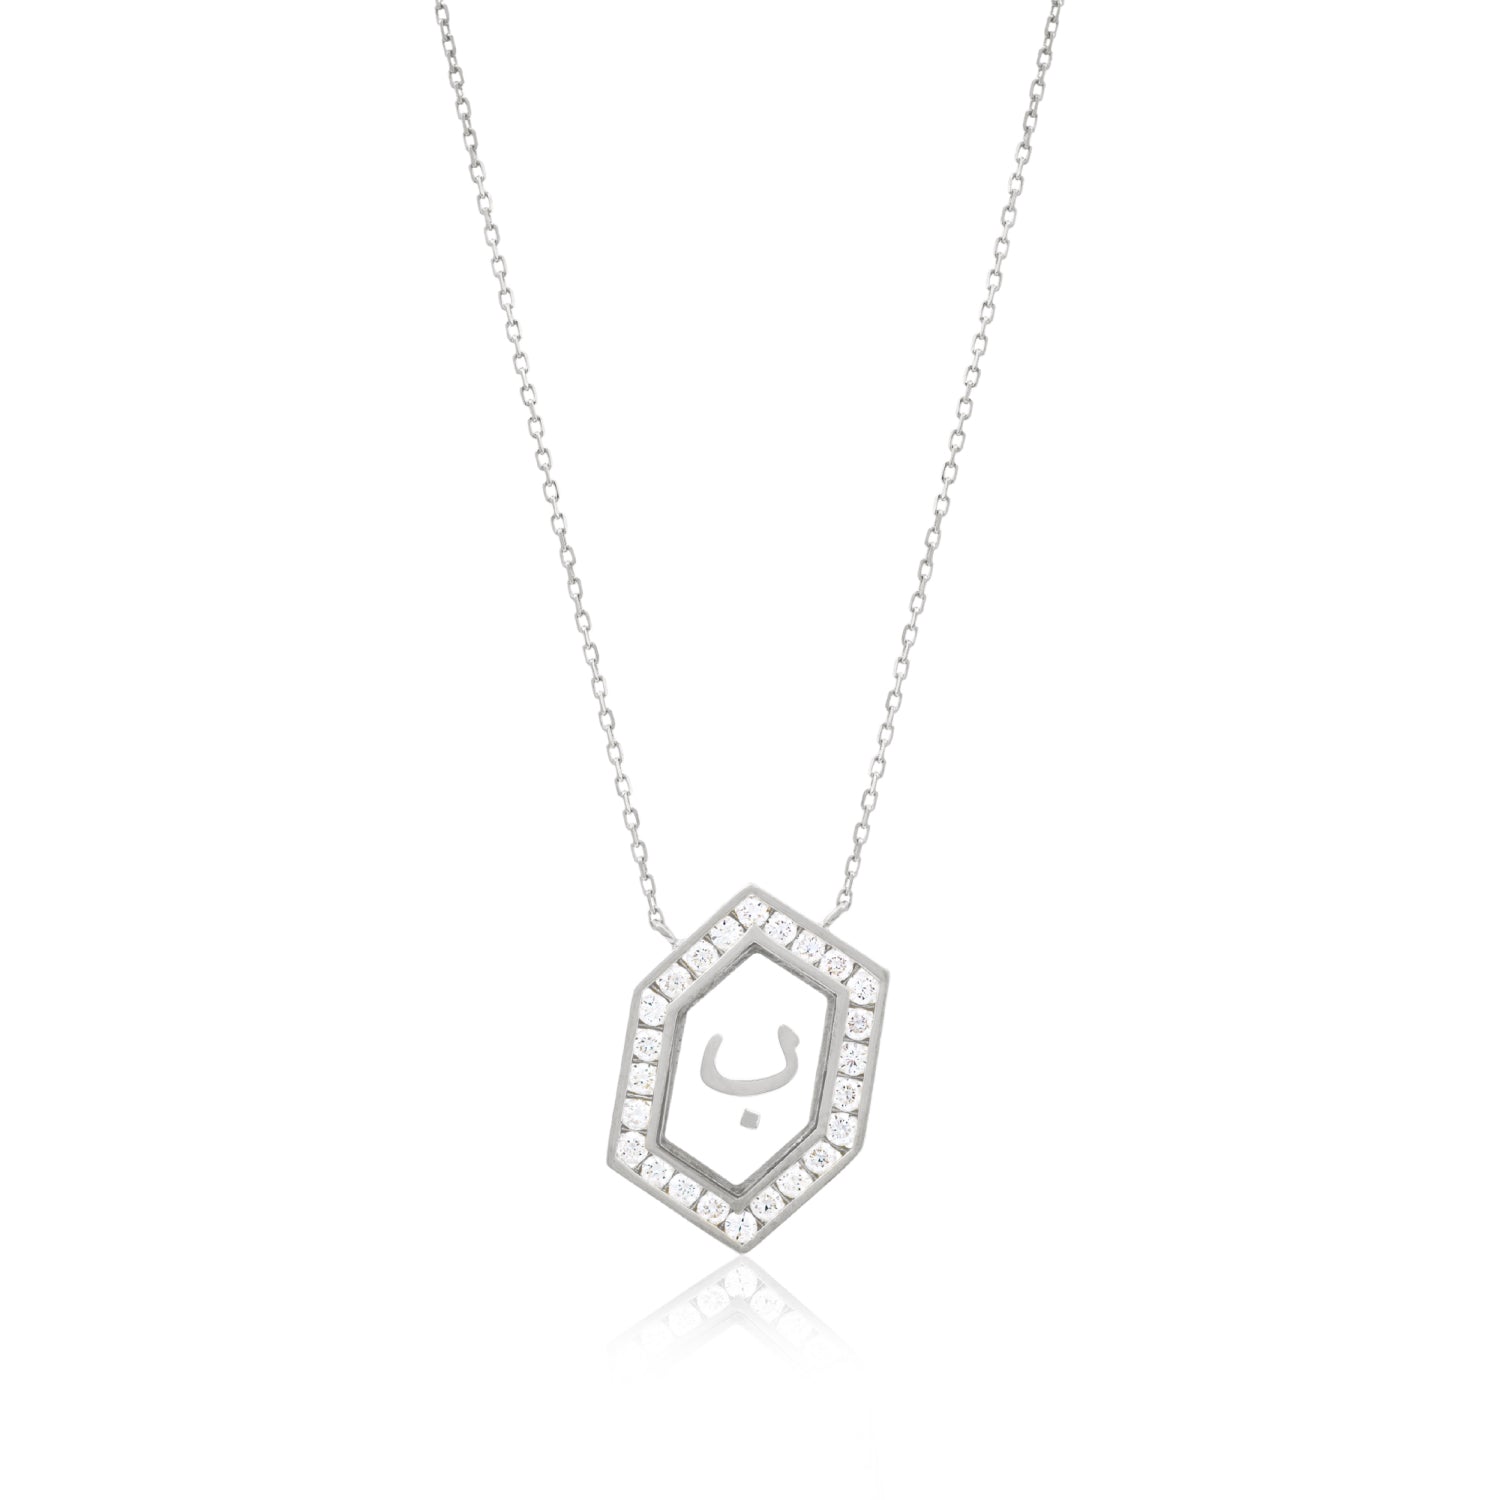 Qamoos 1.0 Letter ب Diamond Necklace in White Gold